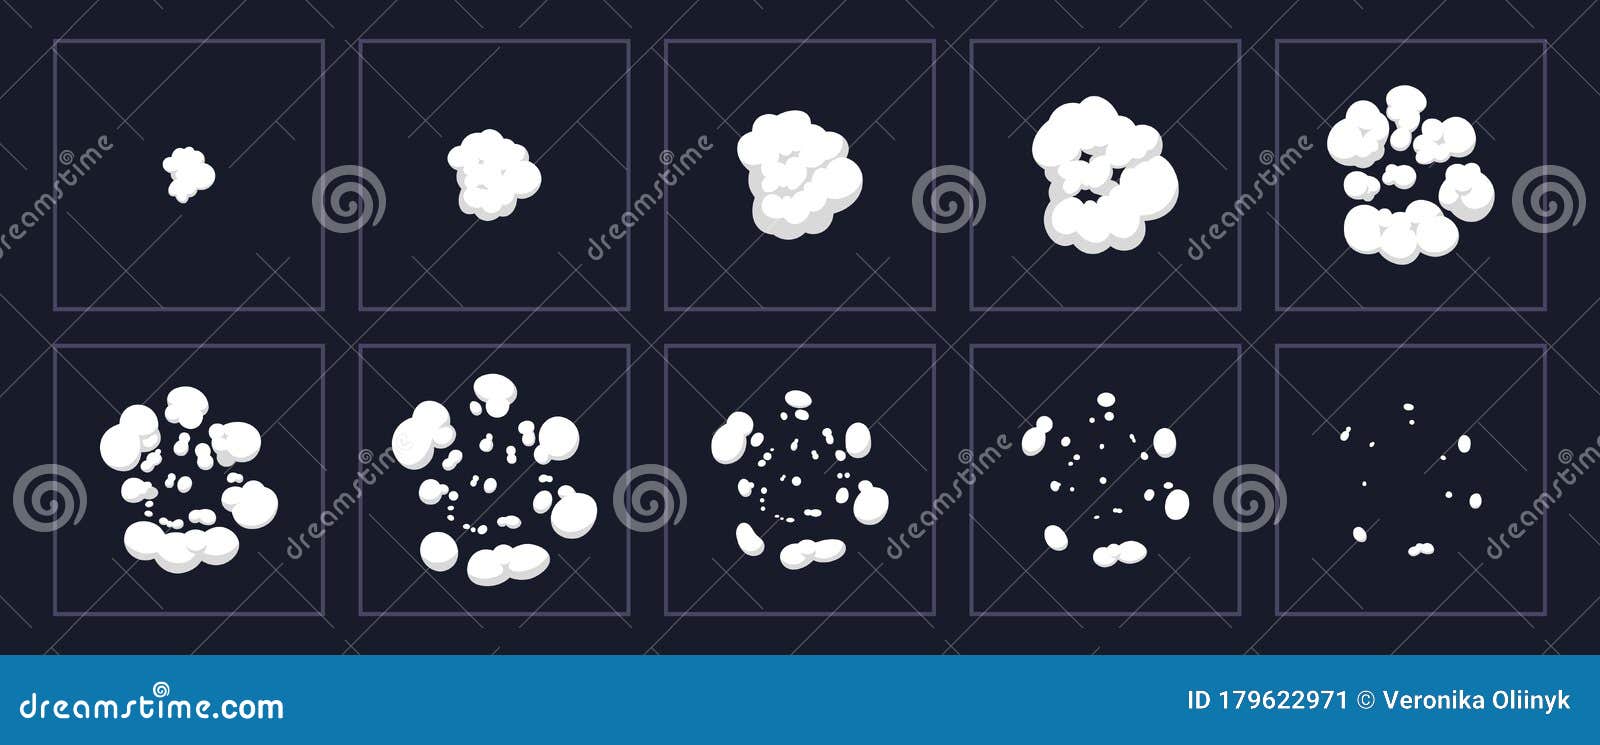 Smoke Explosion Animation. Cartoon Explosion Animated Shot, Explode Clouds  Frames Stock Vector - Illustration of cartoon, exhaust: 179622971